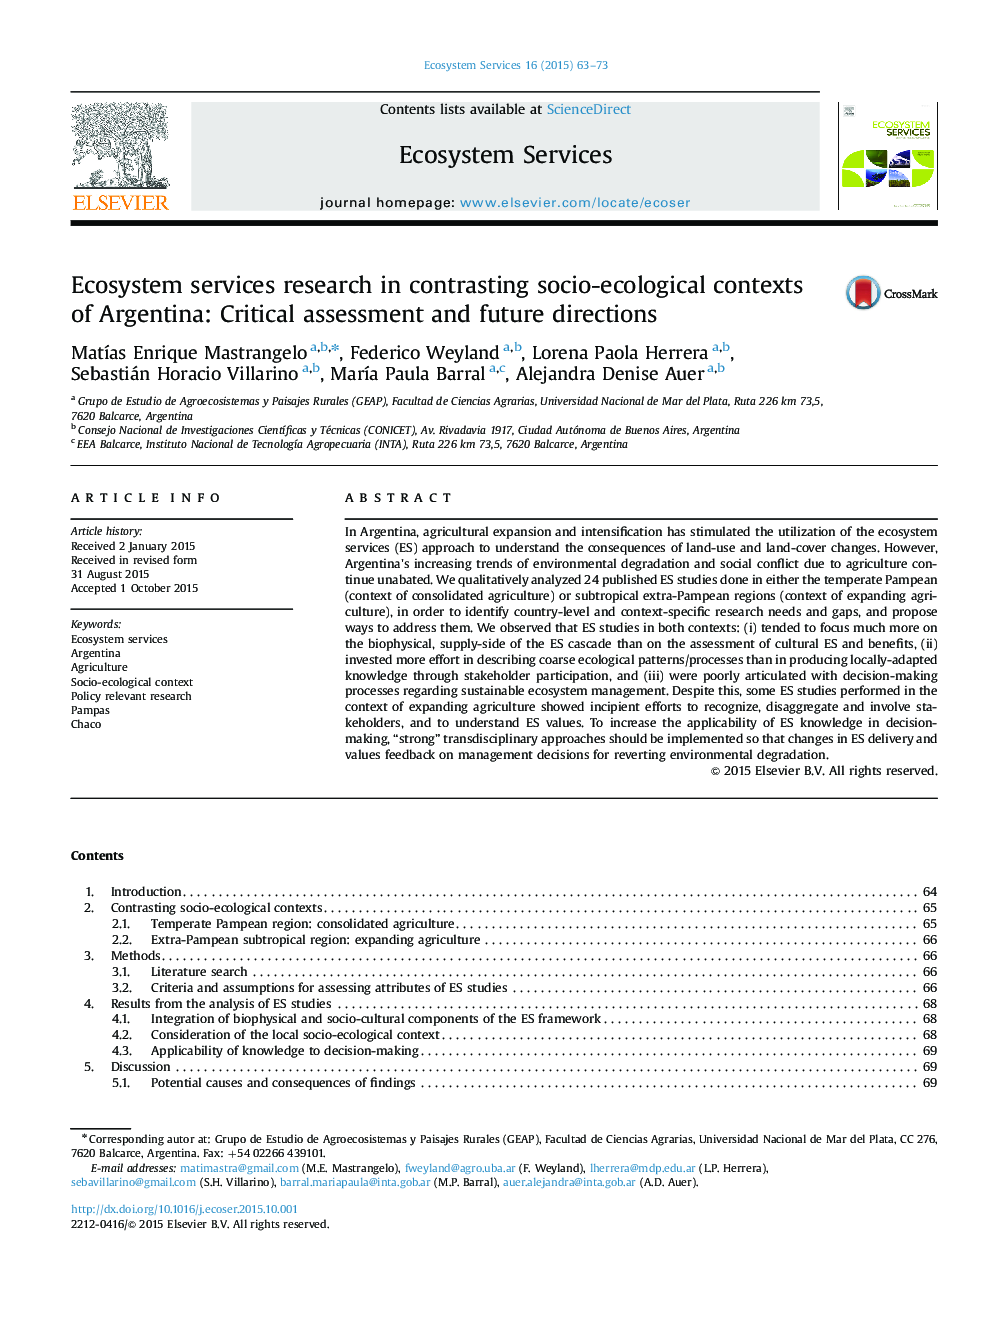 Ecosystem services research in contrasting socio-ecological contexts of Argentina: Critical assessment and future directions